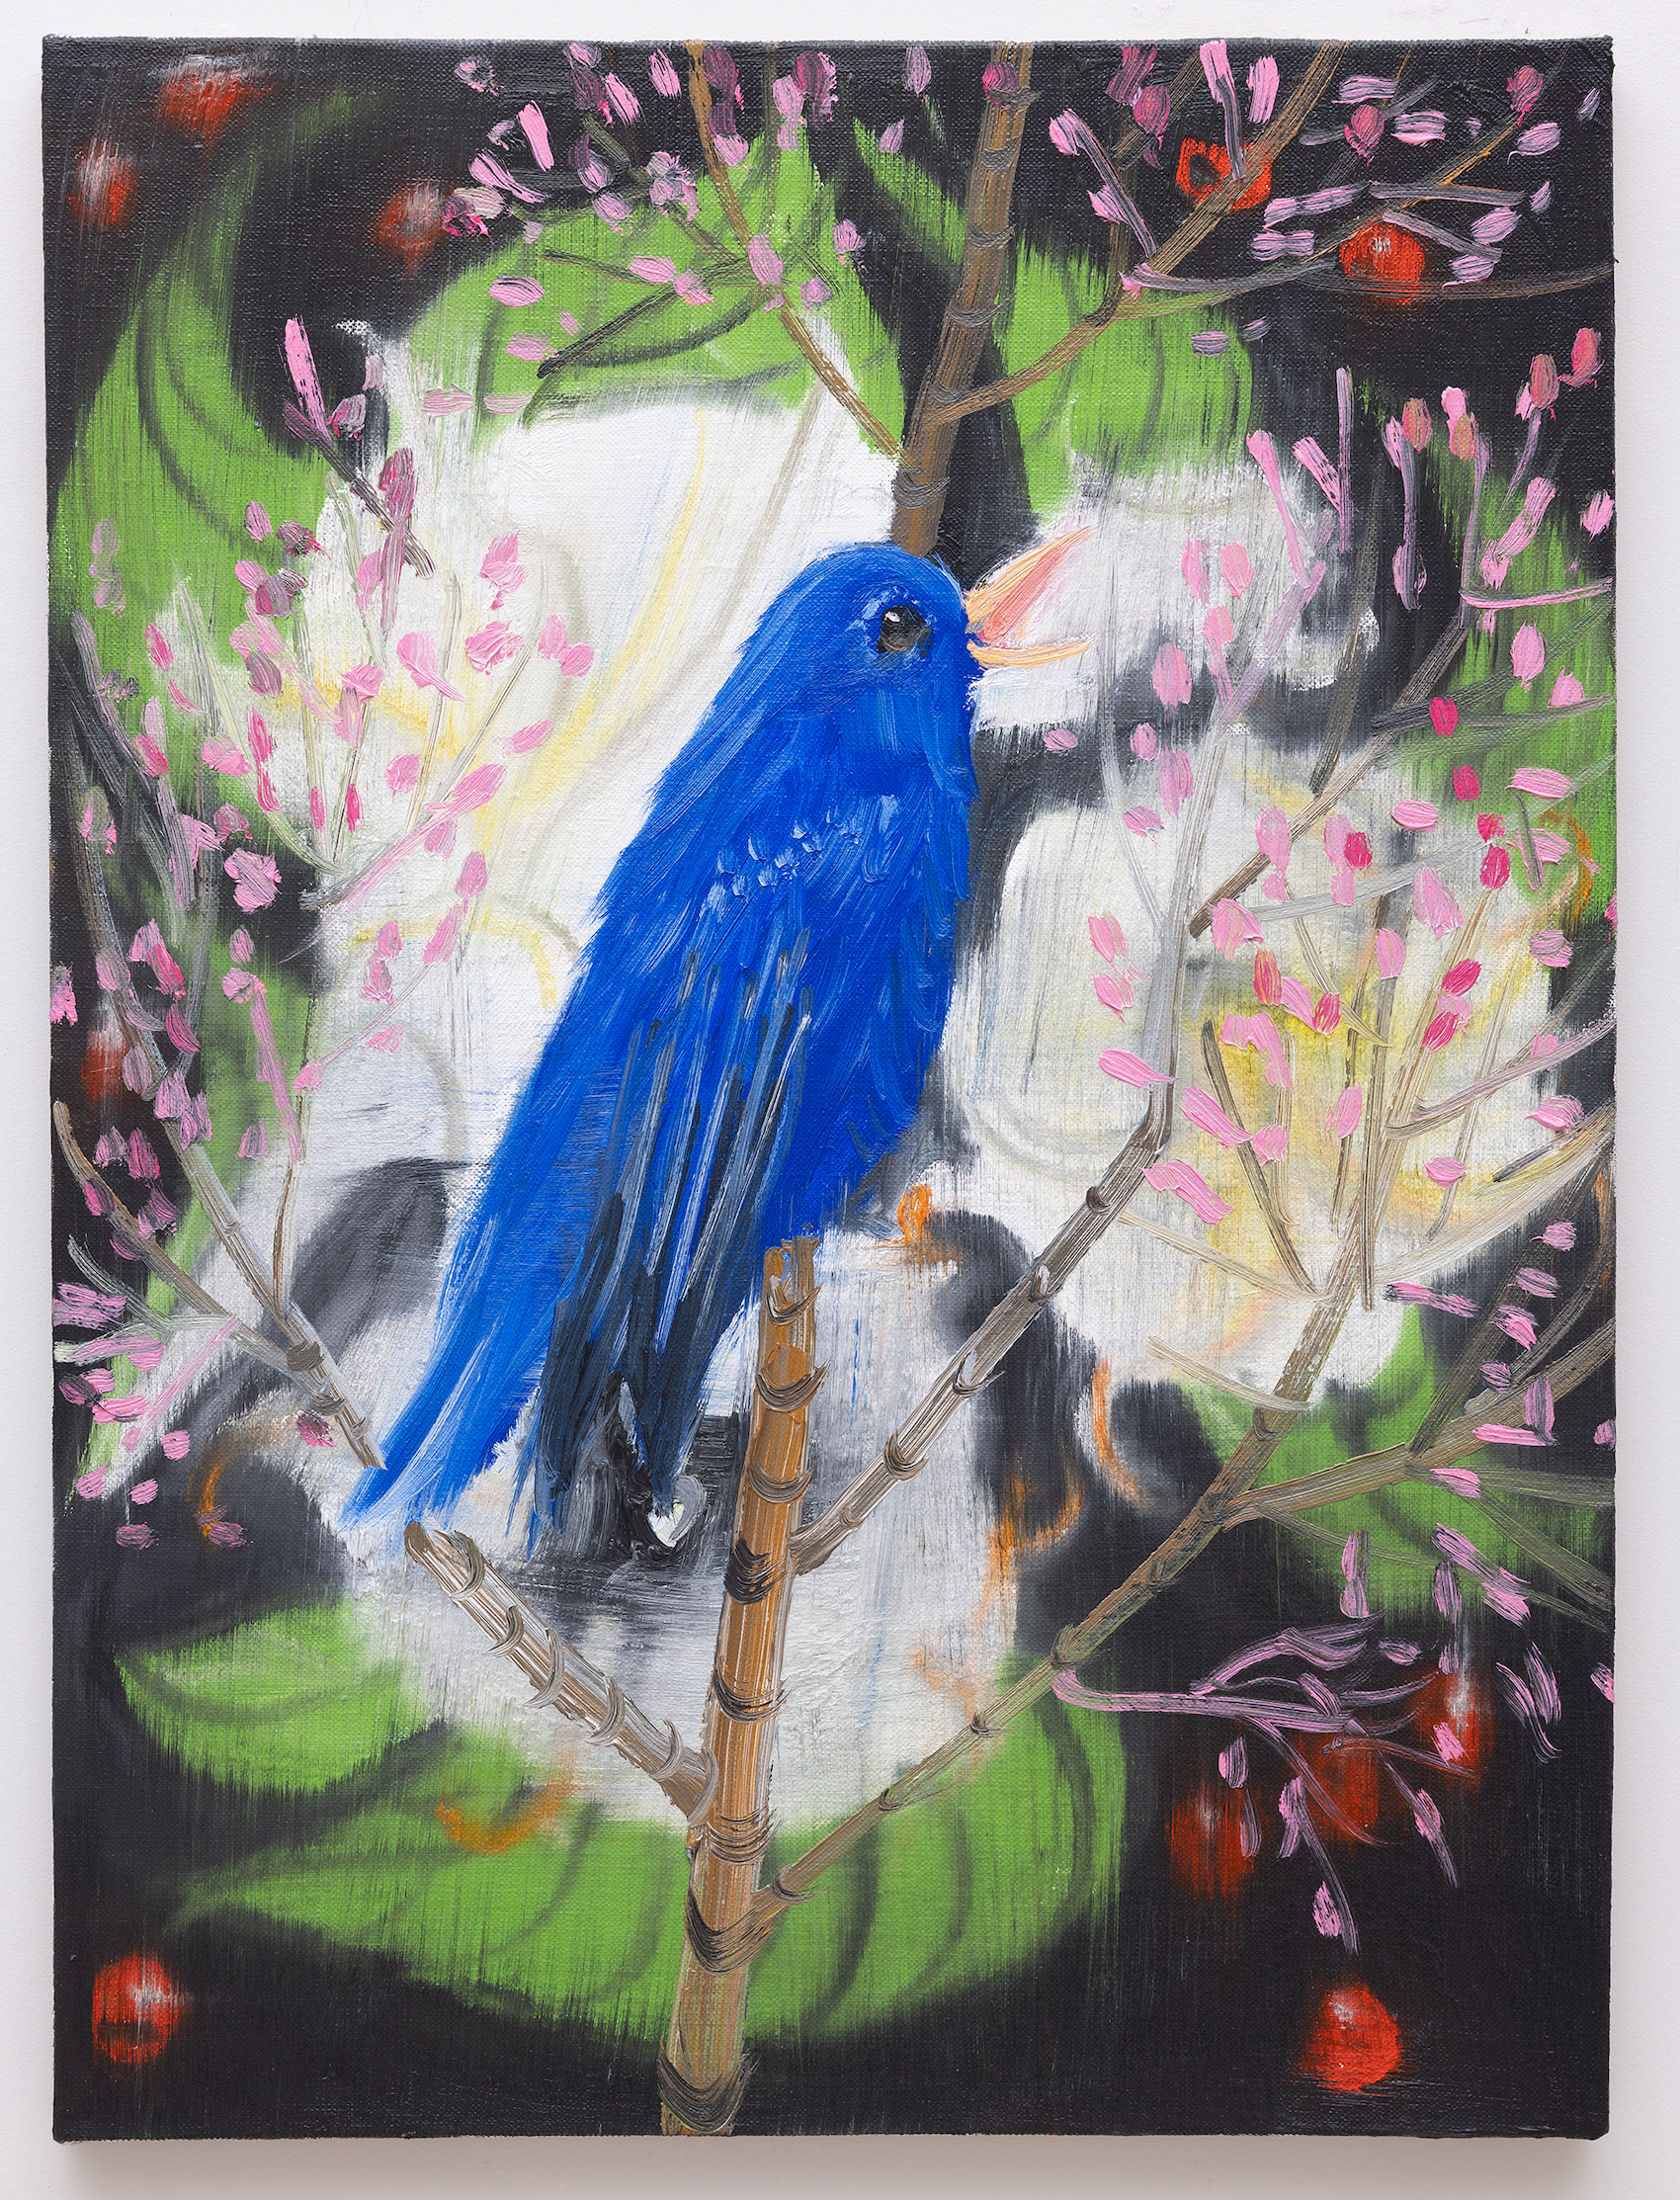 Ann Craven, Portrait of a Blue Bird (After Picabia, on Black with Silvery Light), 2022, oil on linen, 18 x 24".